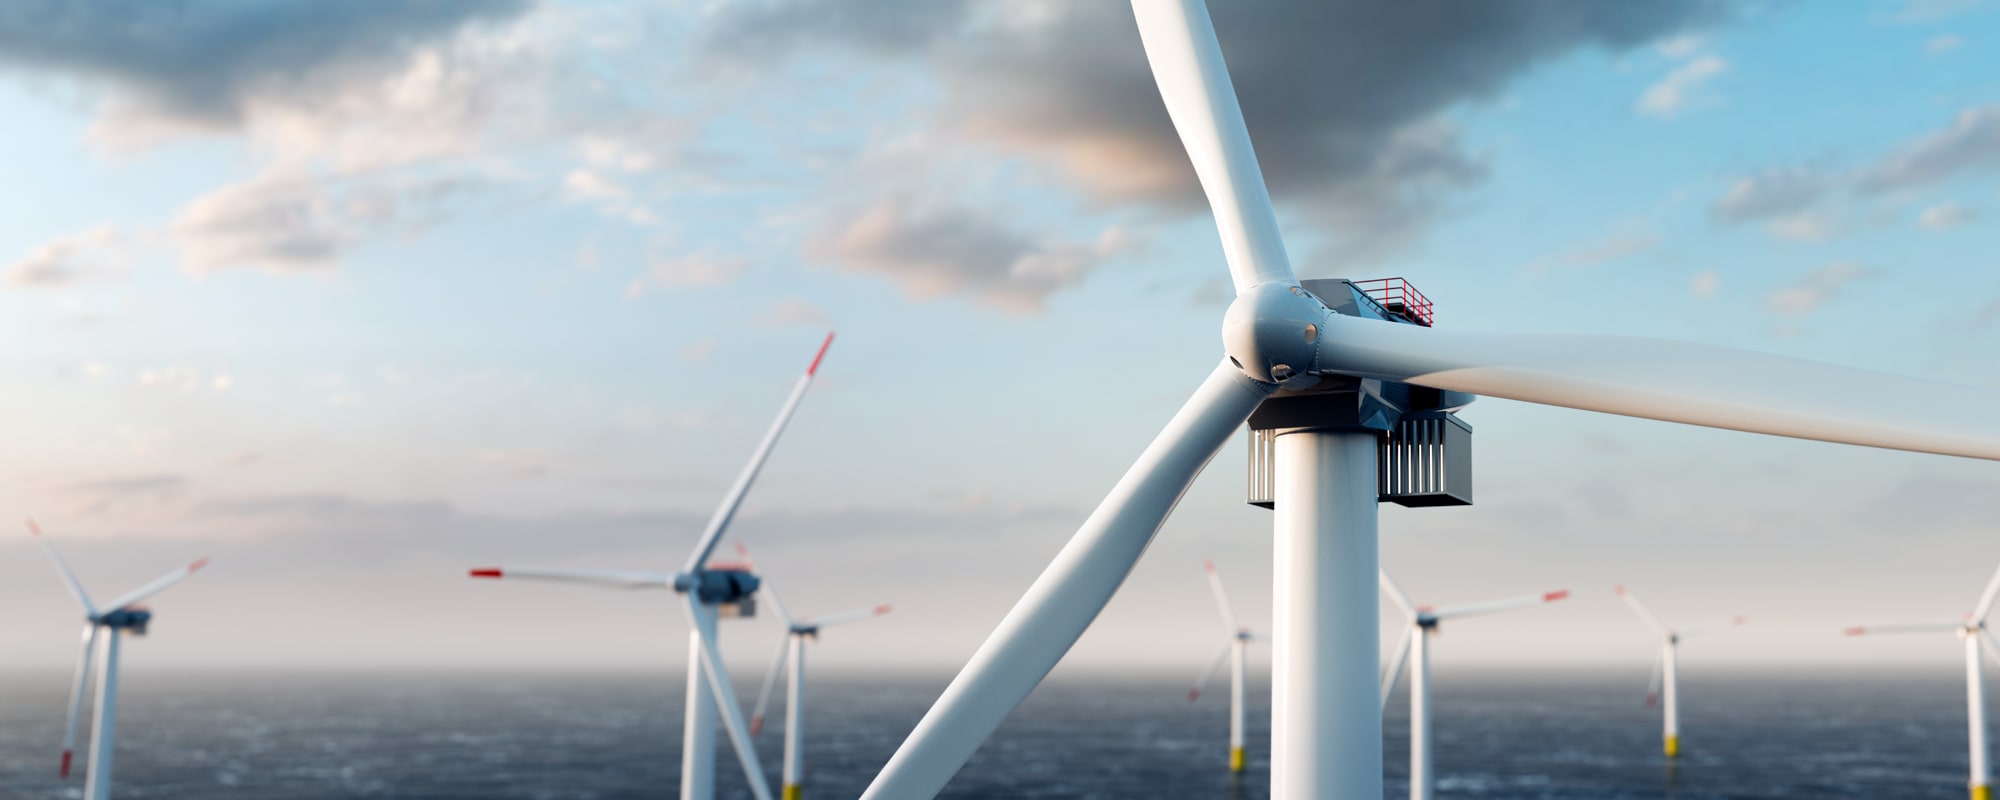 Maintaining the Growing Global Investment in Offshore Wind Energy